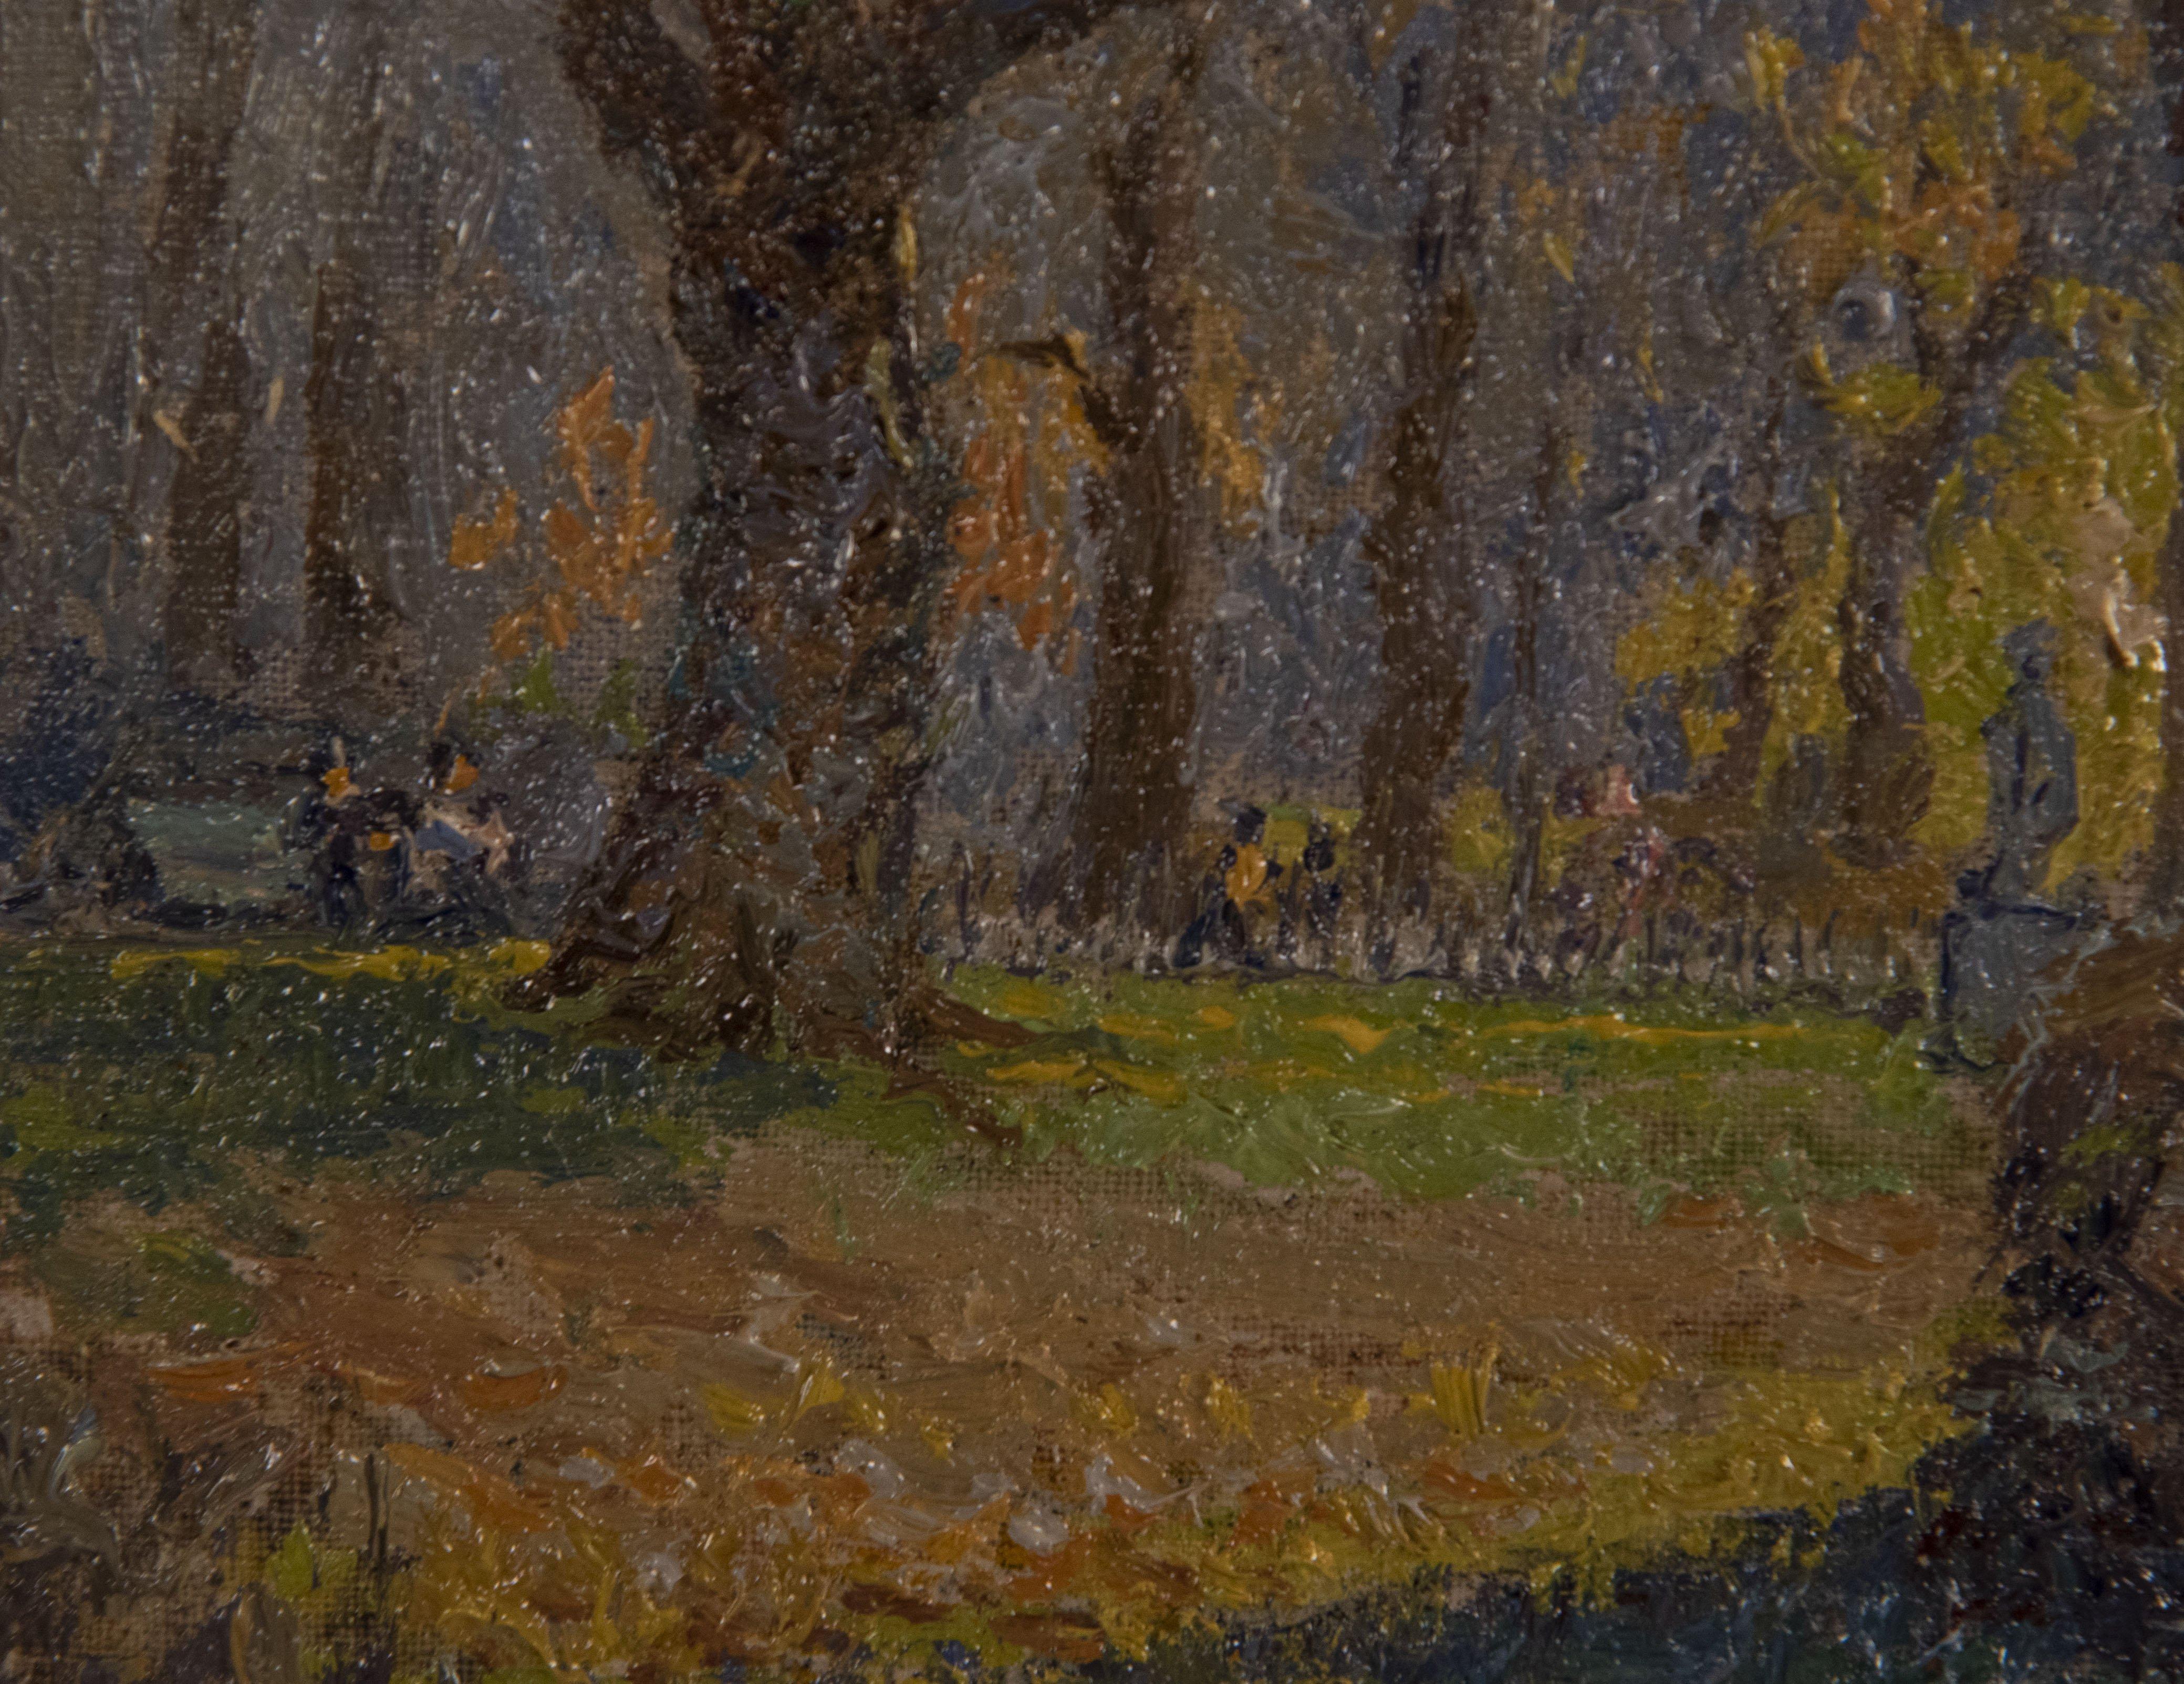 Luxembourg Gardens - Black Landscape Painting by James Taylor Harwood